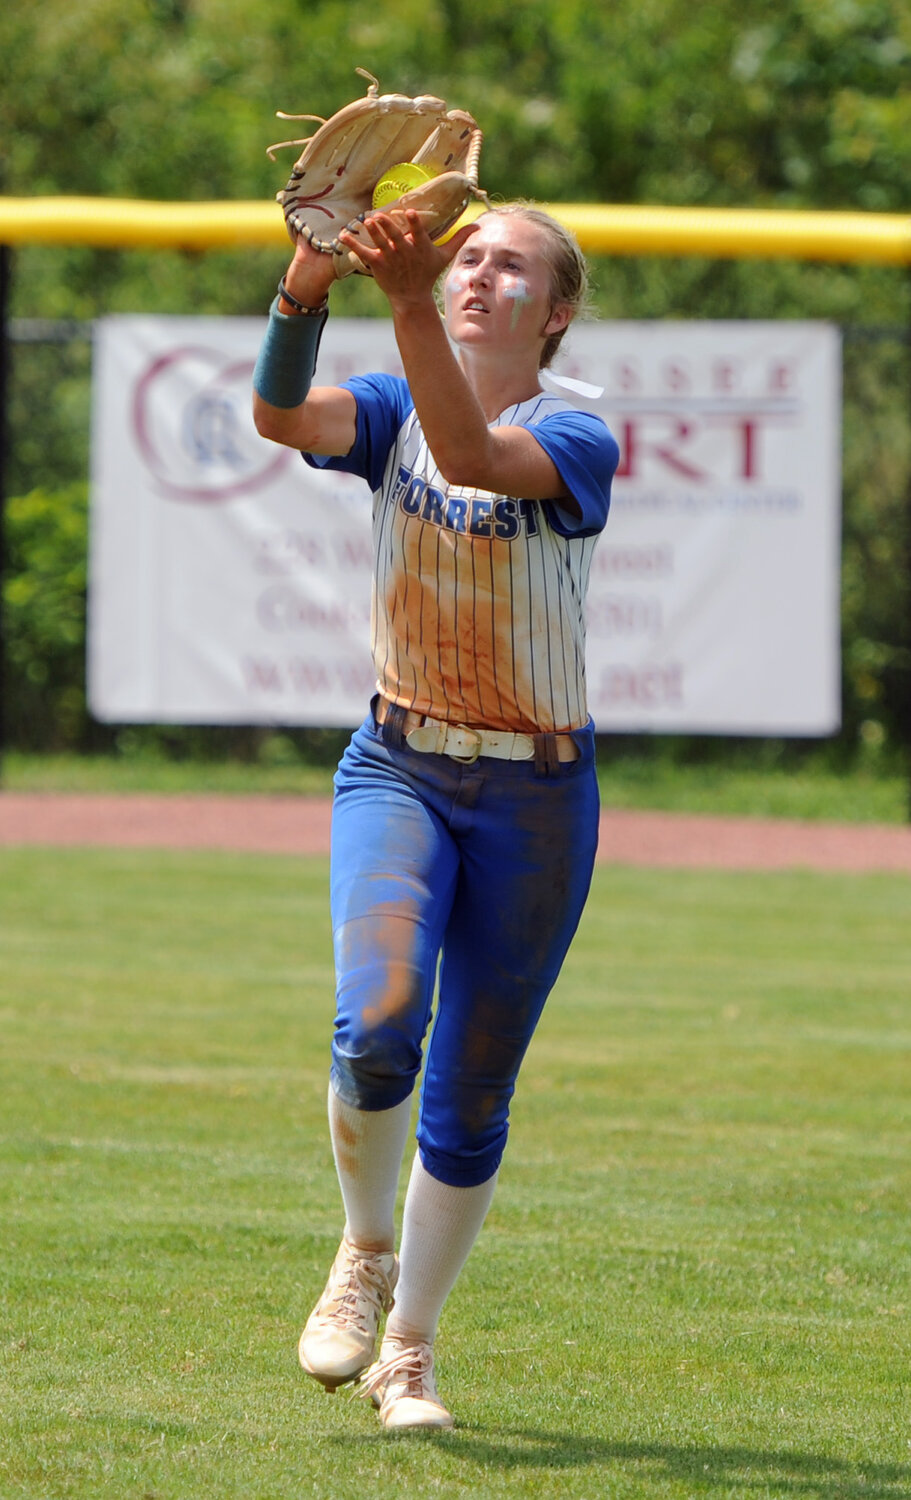 Maggie Daughrity puts the squeeze on a fly ball as Forrest retires the second inning.